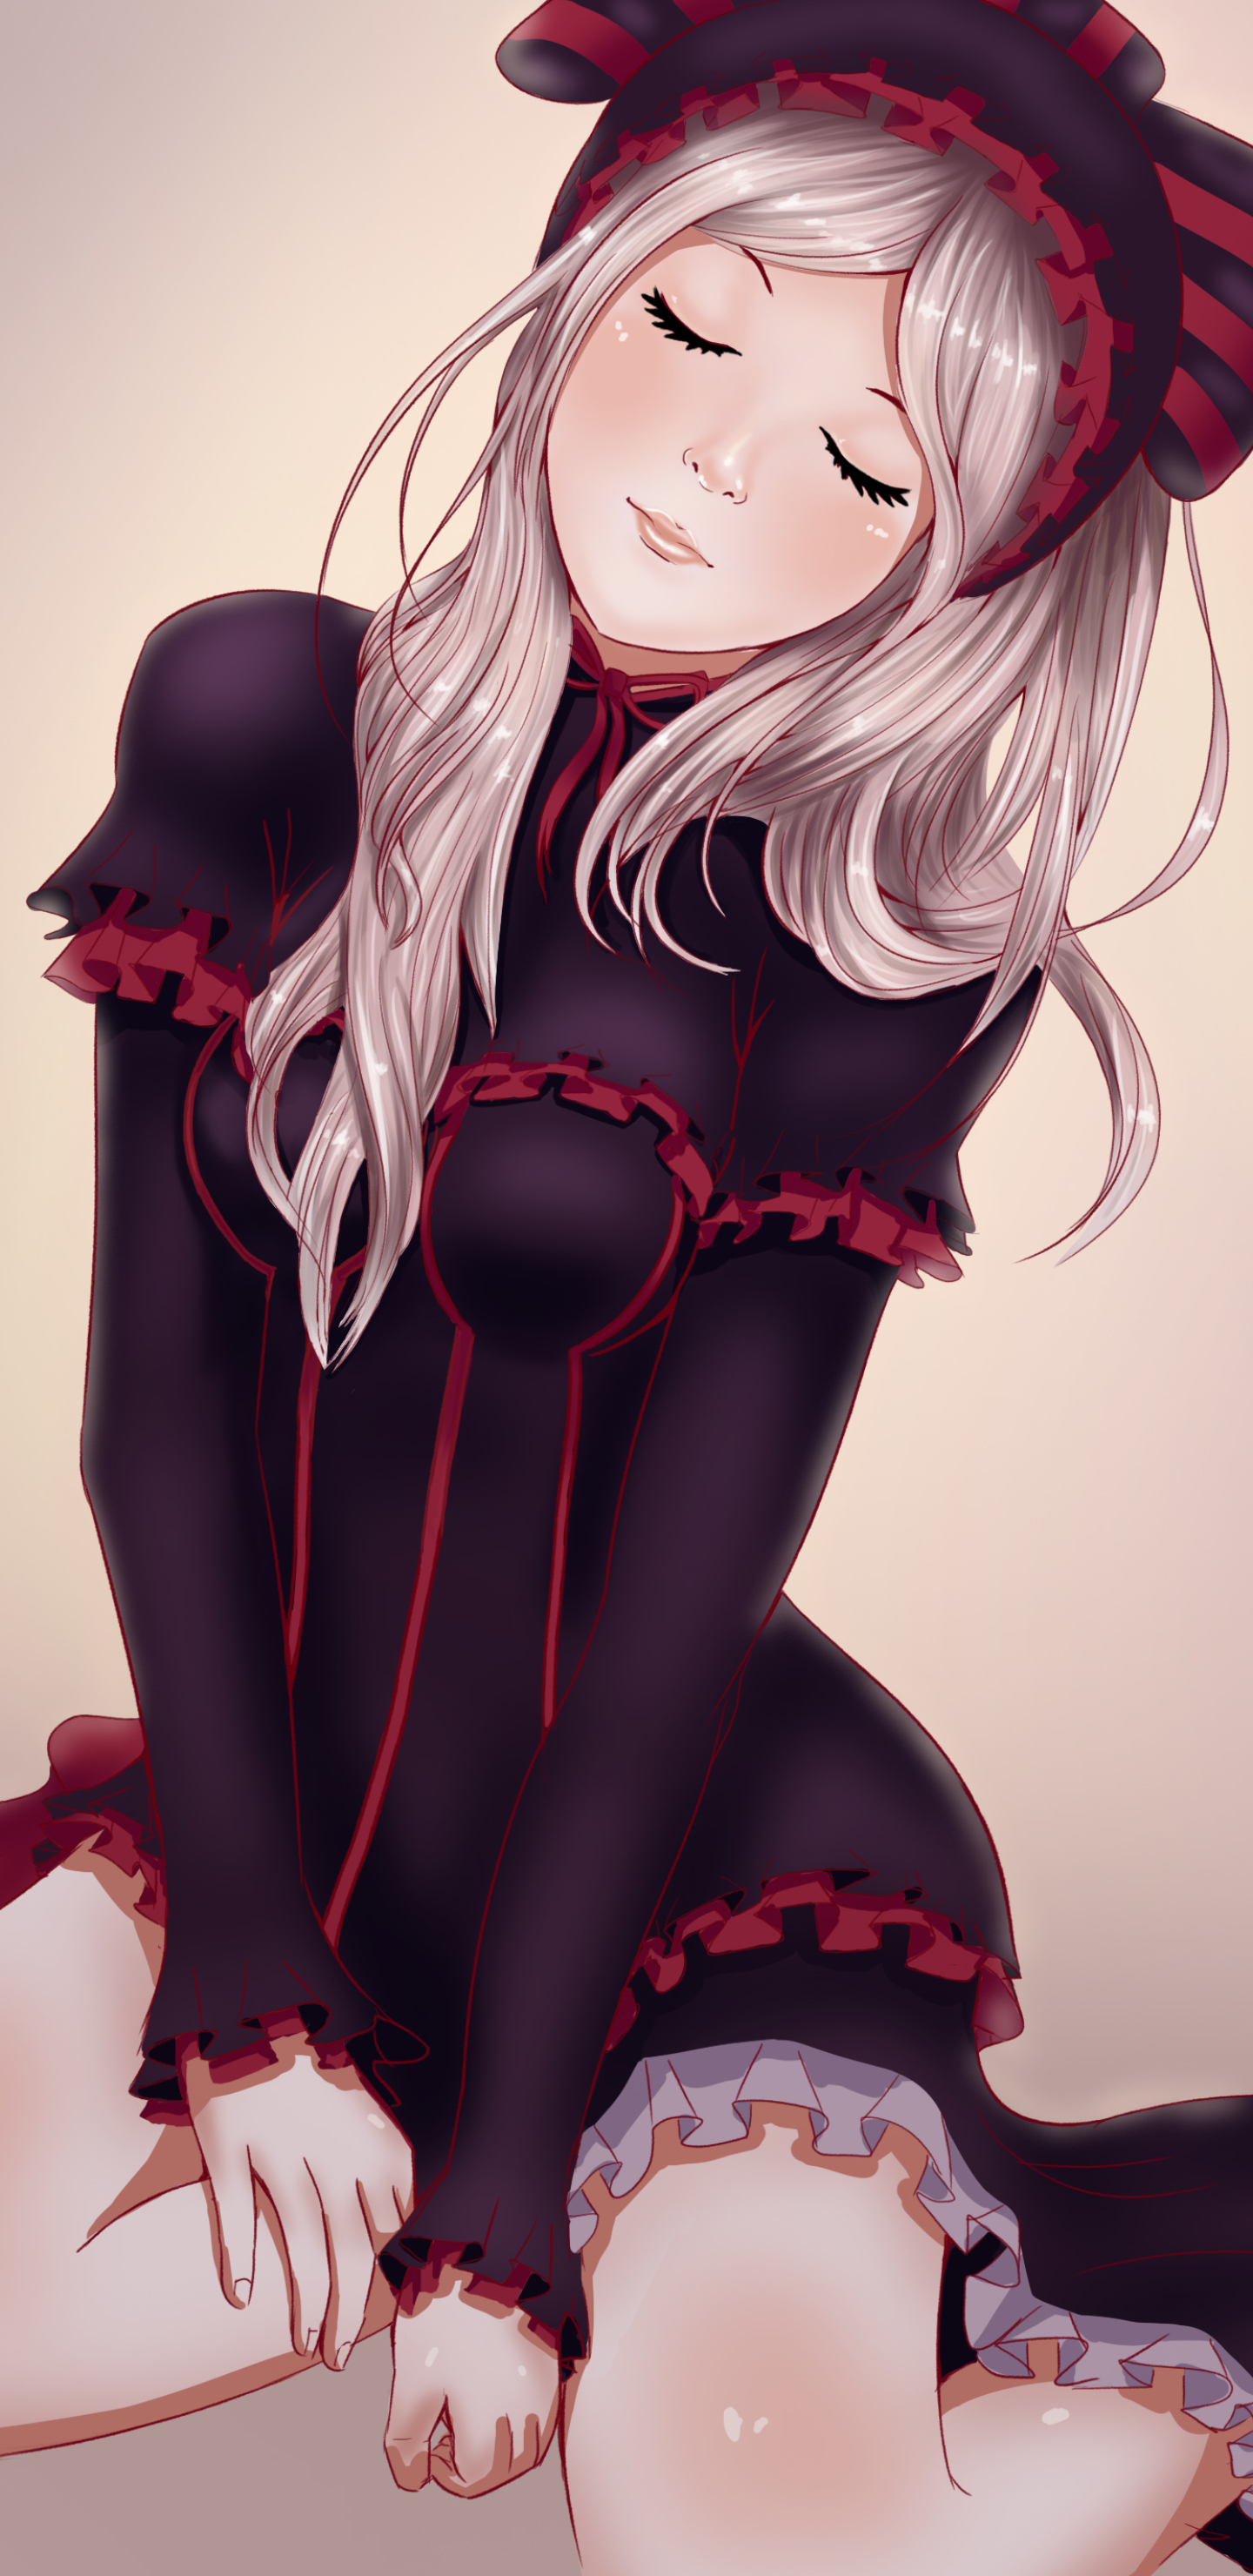 Download mobile wallpaper Anime, Overlord, Shalltear Bloodfallen for free.